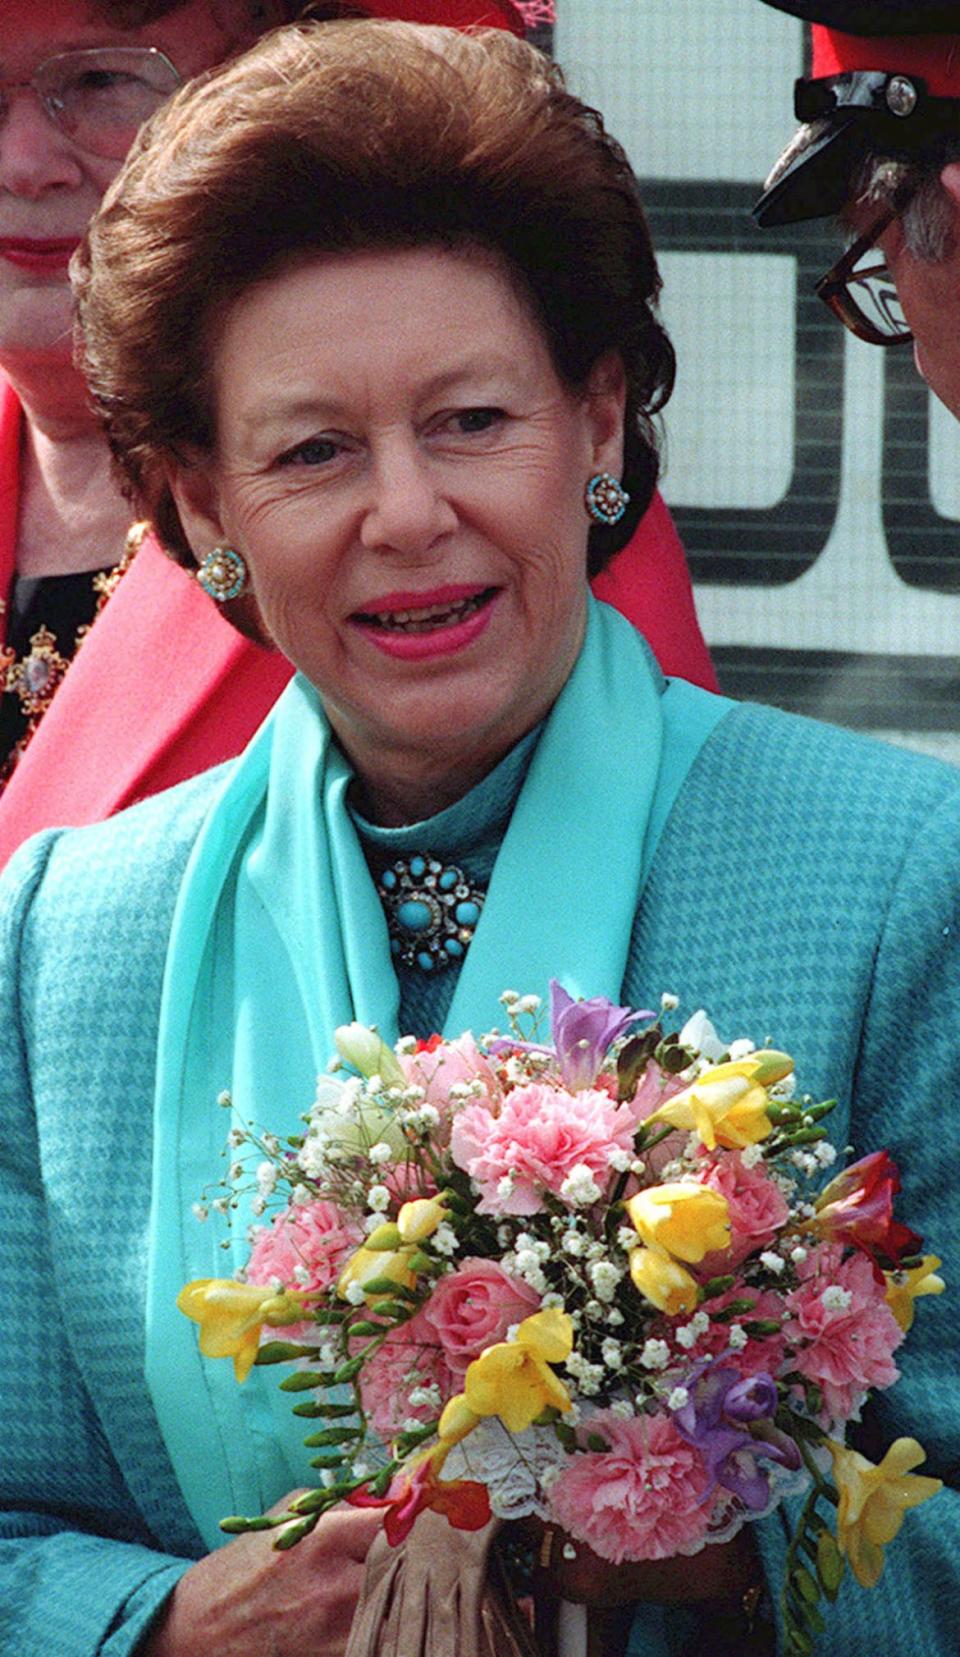 Britain's Princess Margaret smiles as she leaves a youth centre in Manchester in this April 1994 file photo.